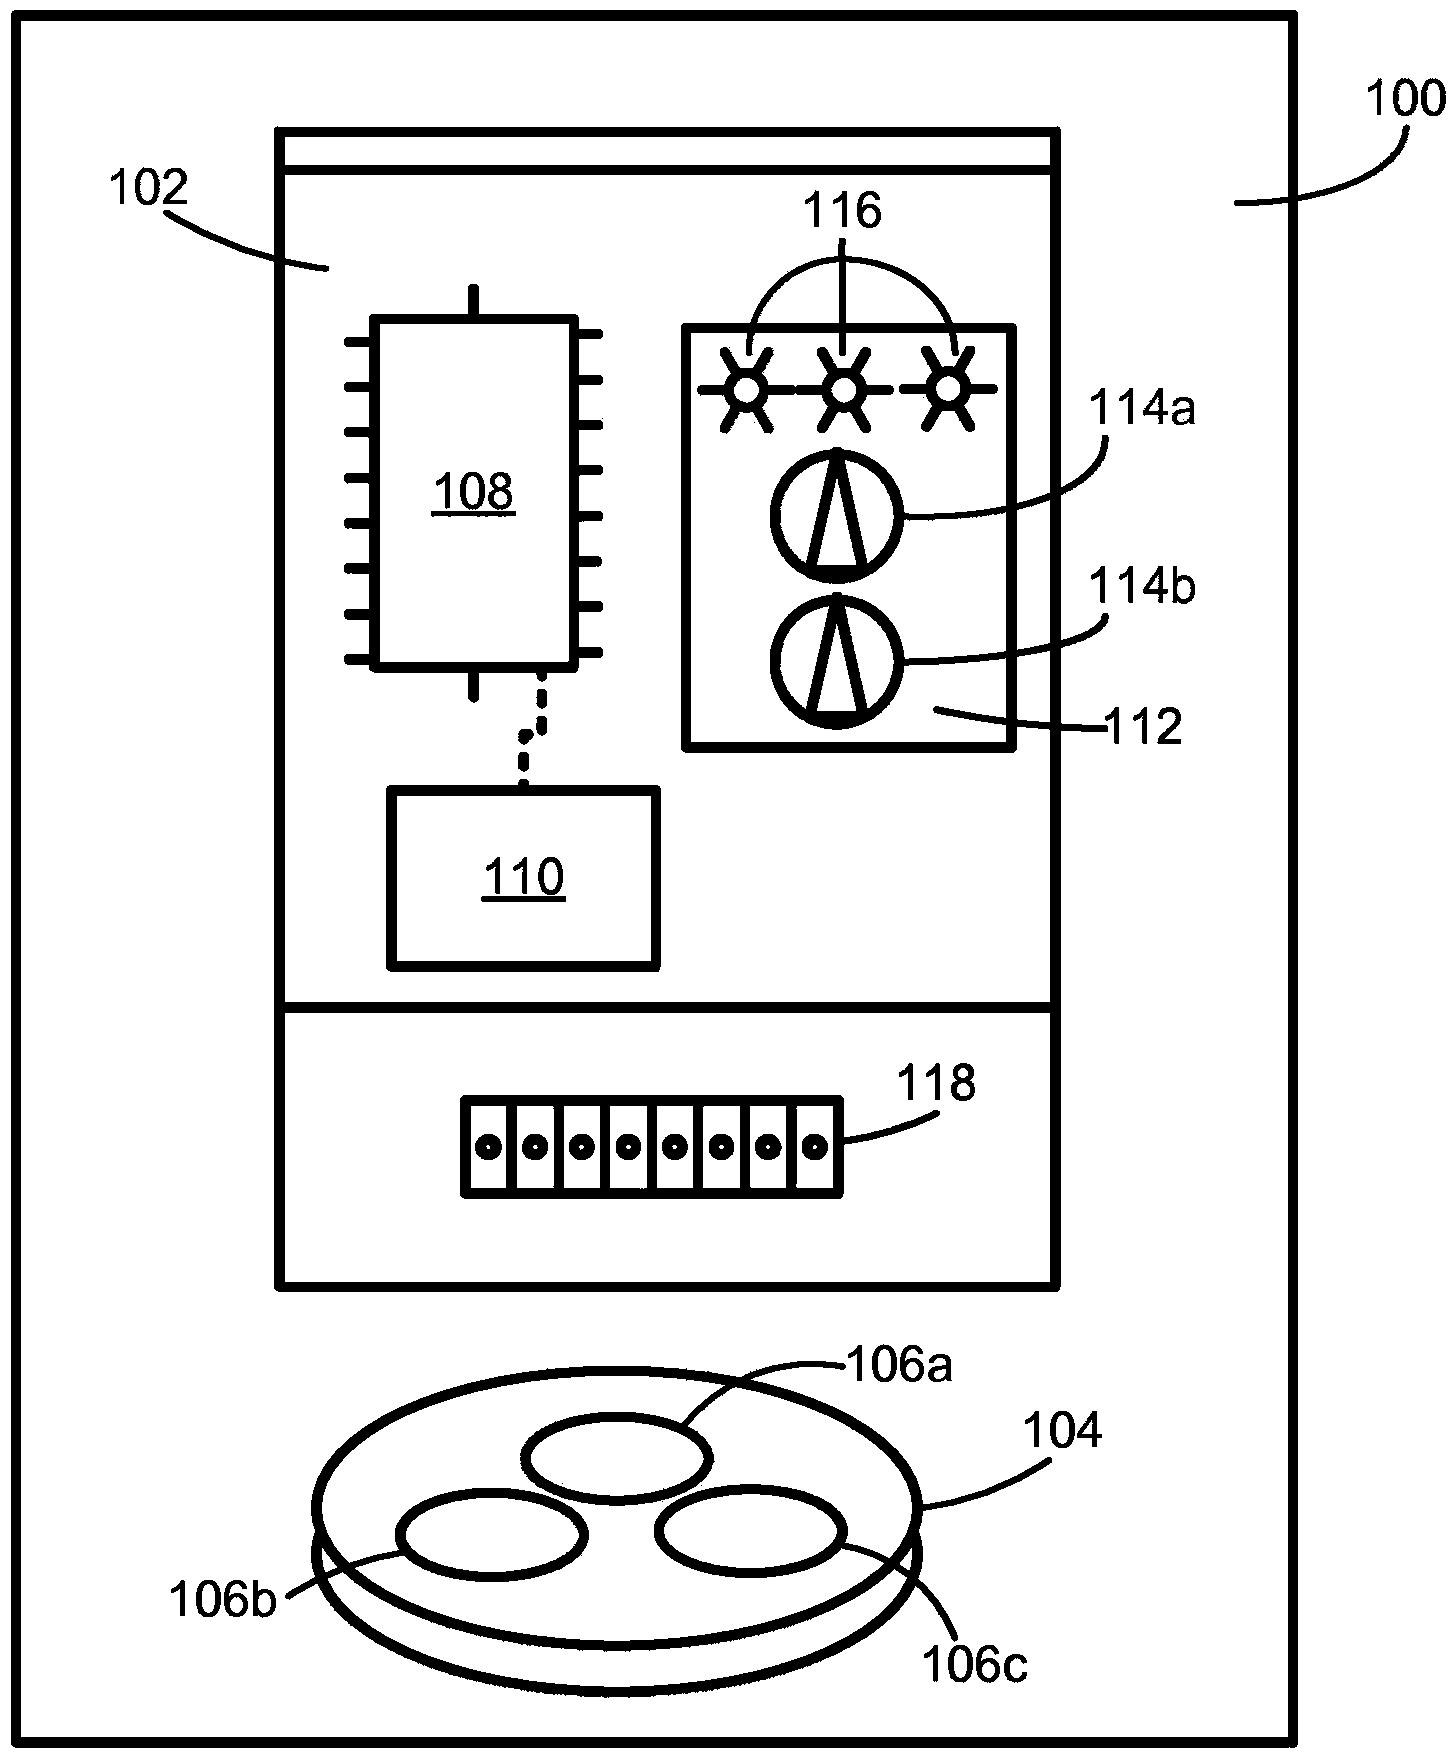 Motor protection and control apparatus, system, and/or method